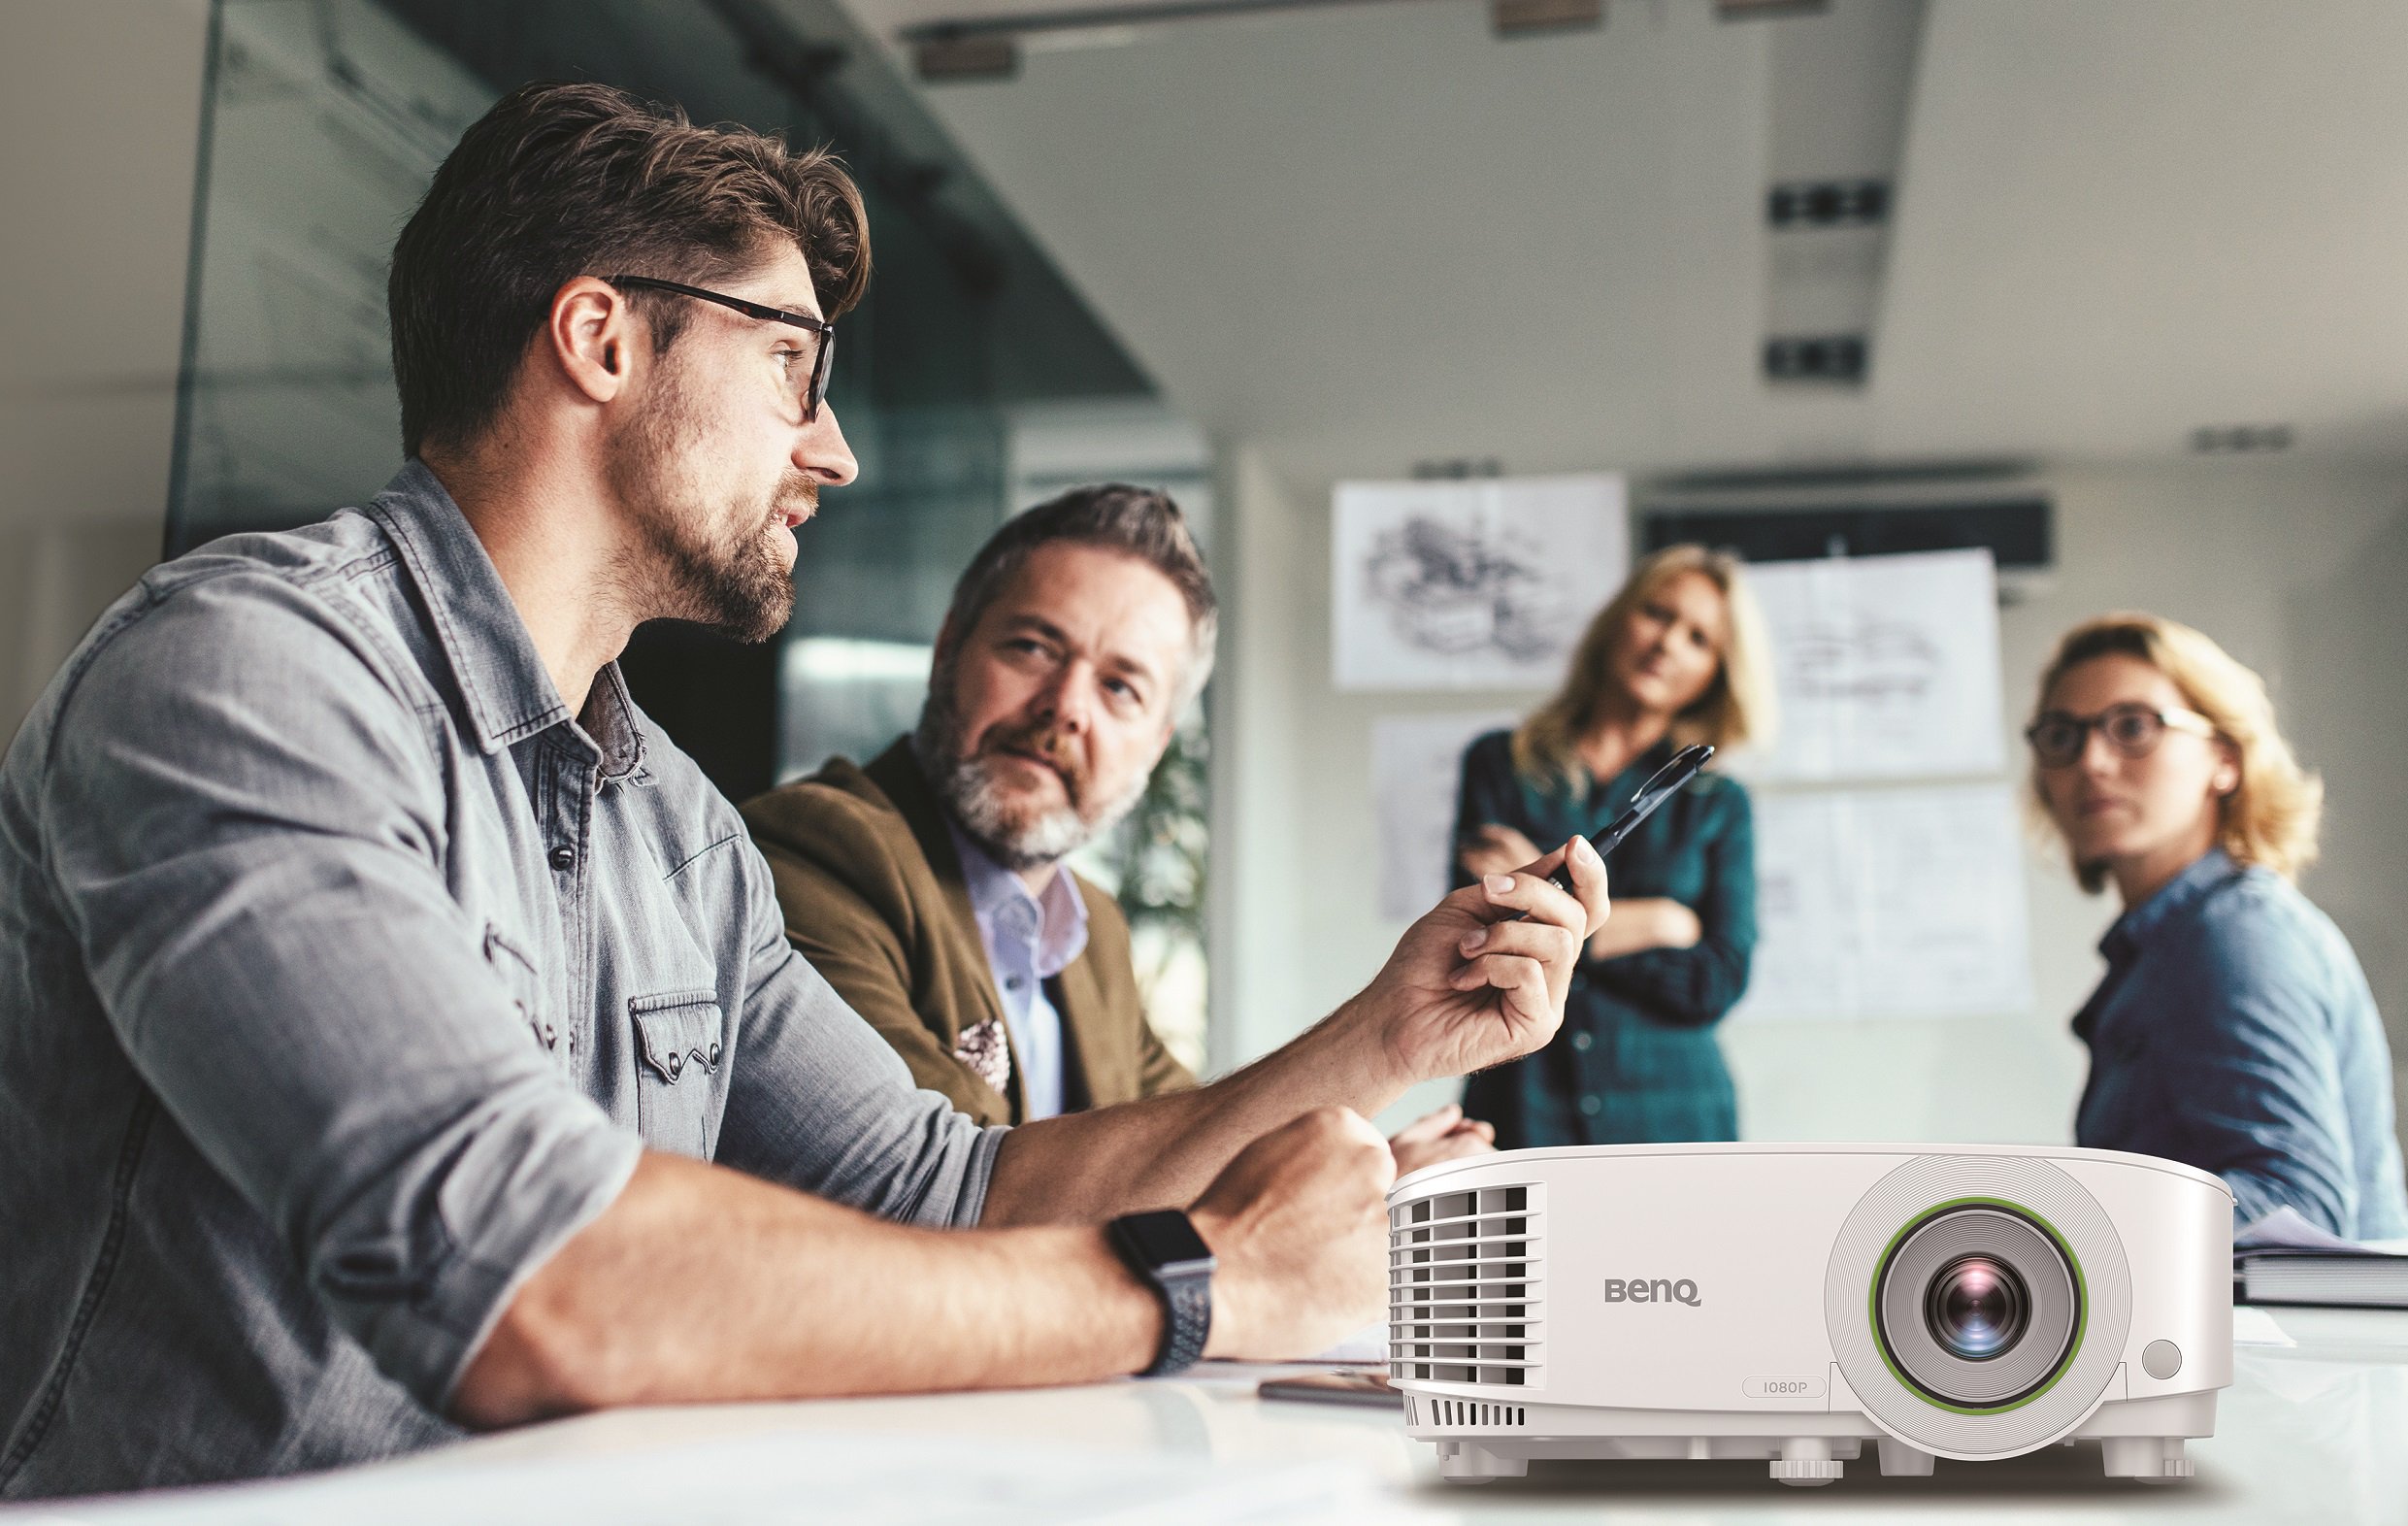 BenQ wireless smart projector is the ideal projector for your work or home. Easy to share contents from your iPhone or iPad. Best iphone projector. 